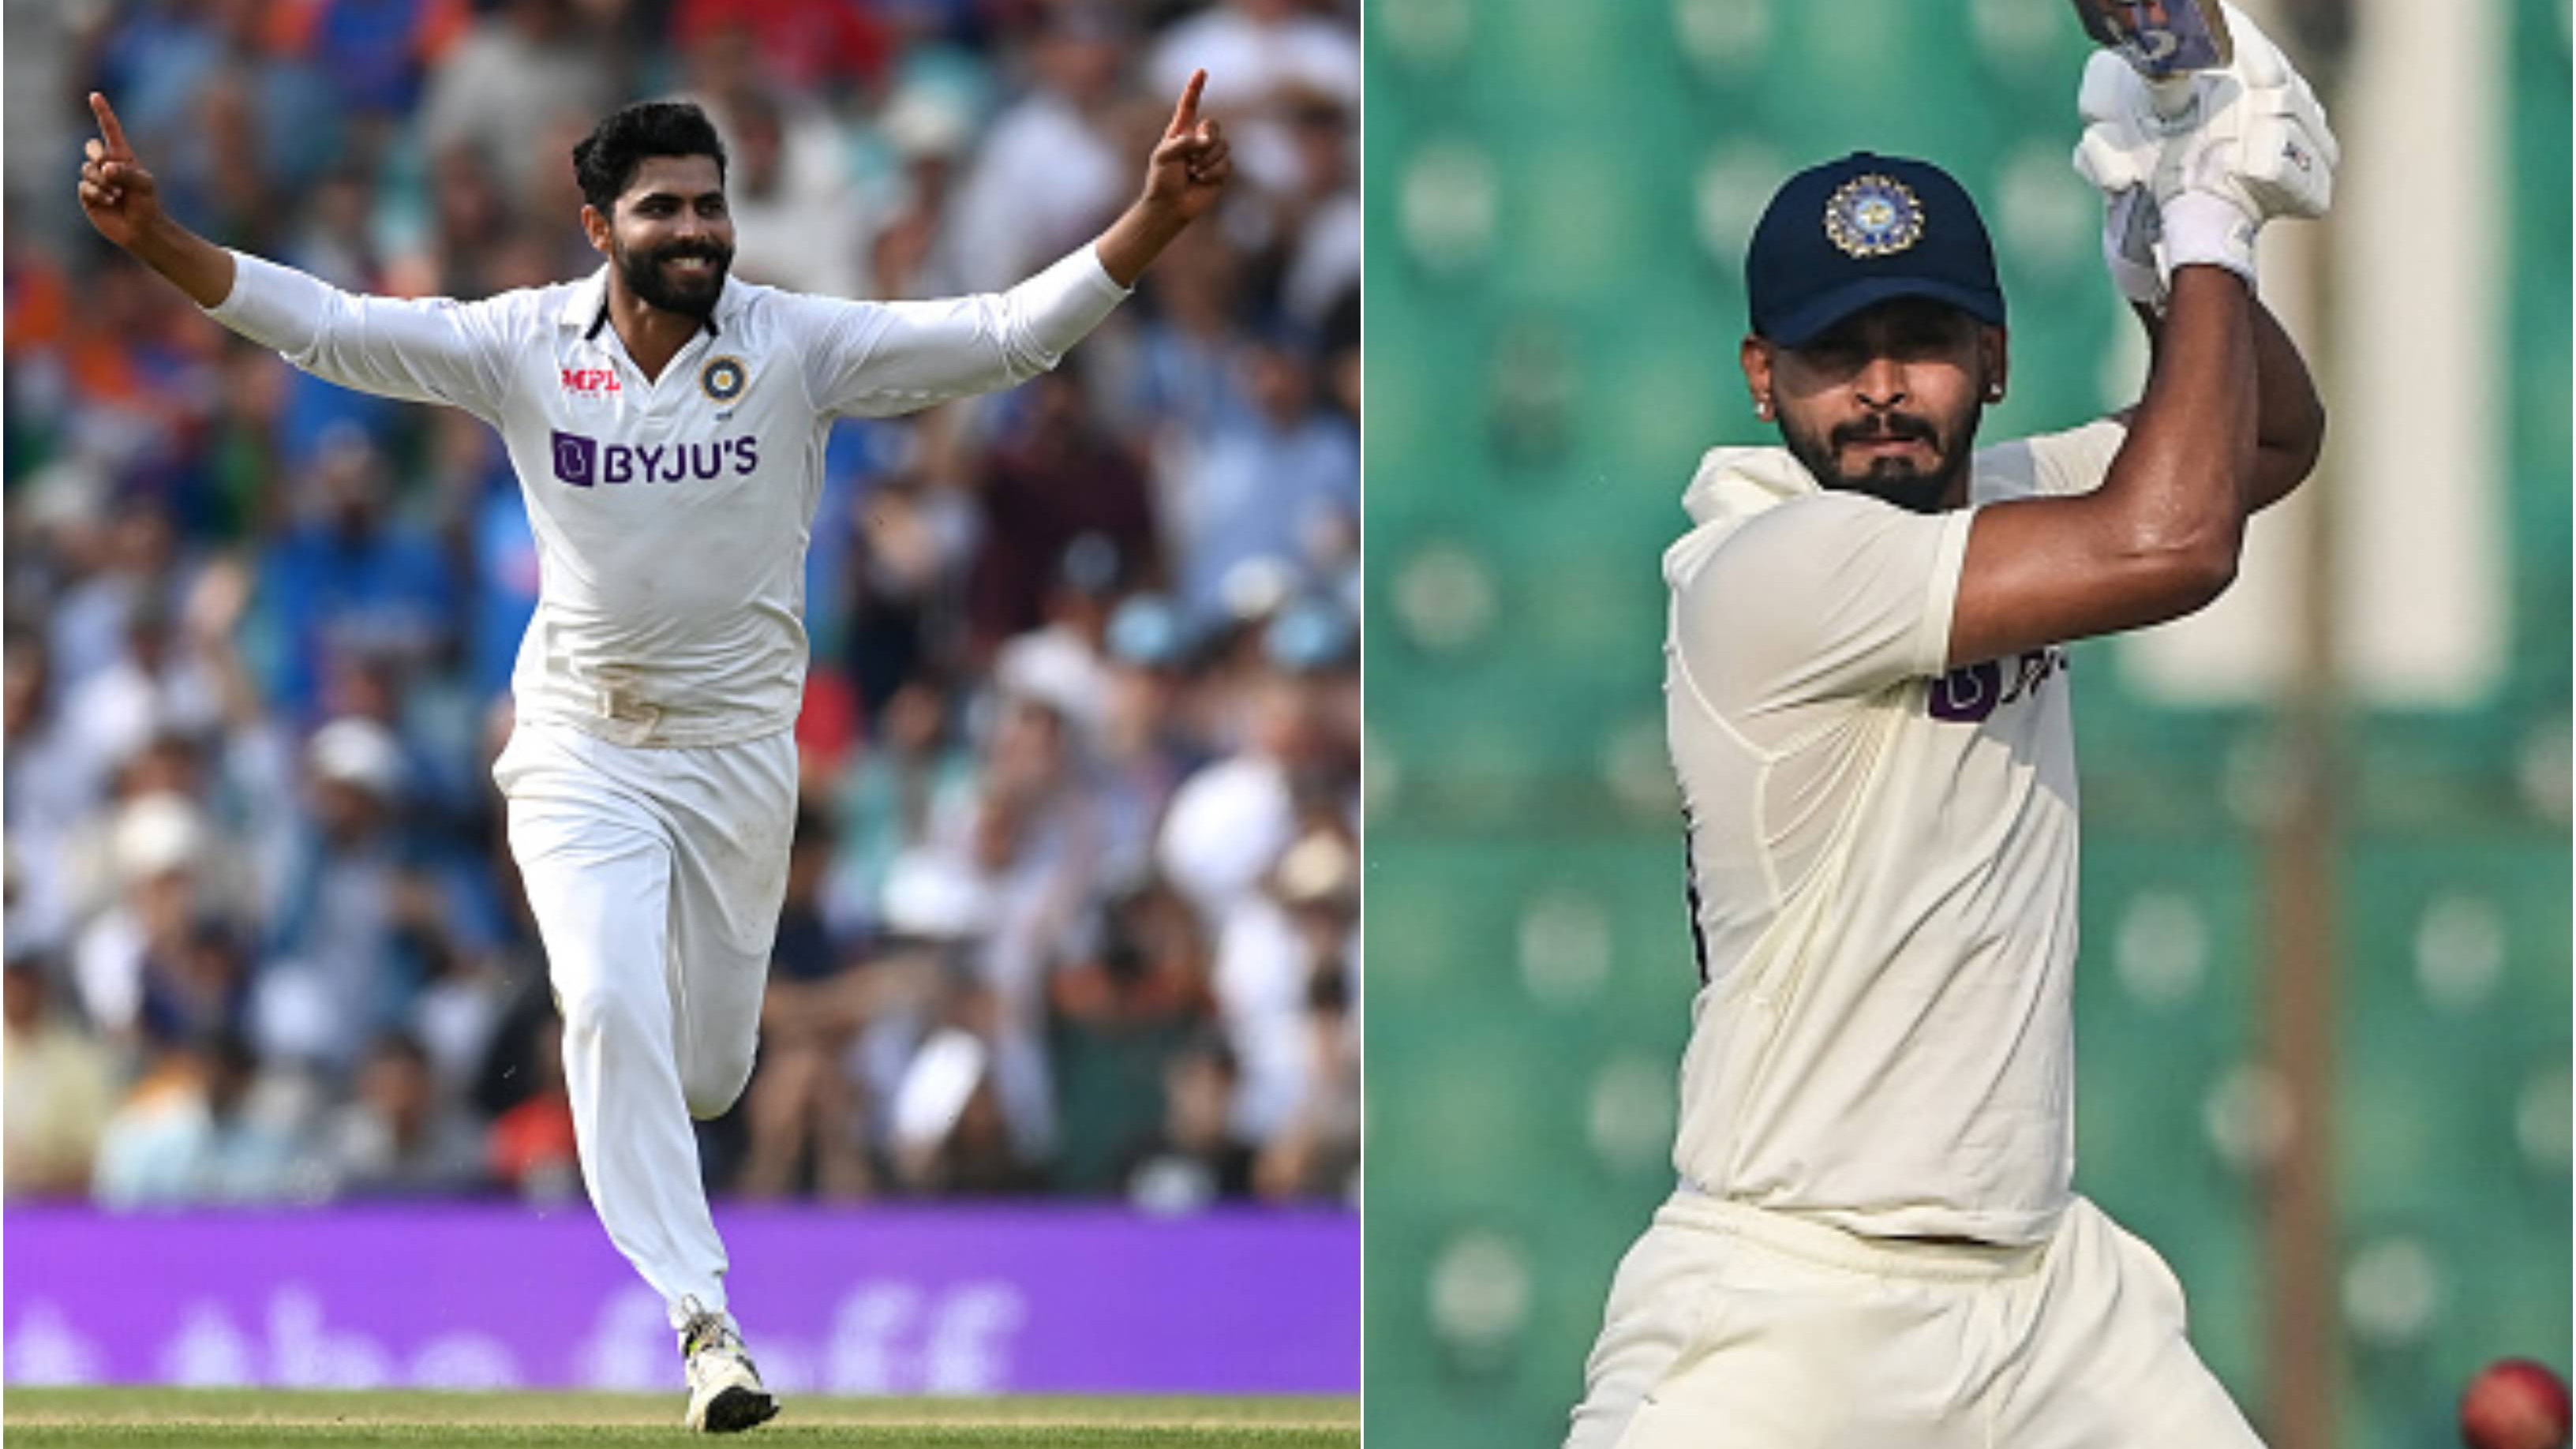 IND v AUS 2023: Ravindra Jadeja cleared to play first Test; Shreyas Iyer’s participation remains doubtful – Report